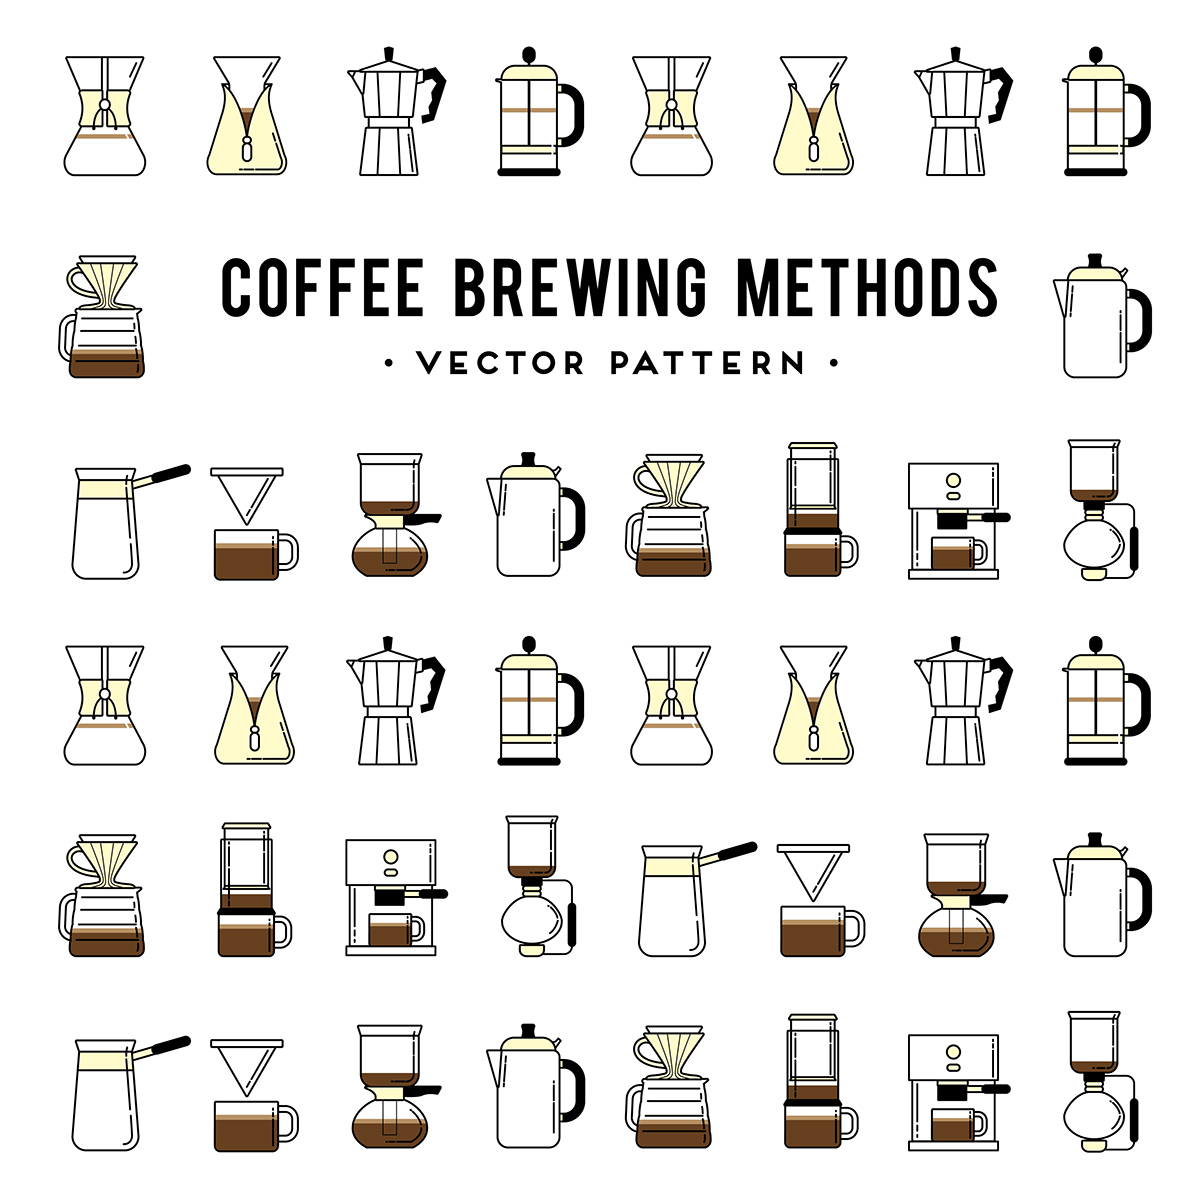 5 Tips to Dramatically Improve Your Coffee - Coffee Brew Guides